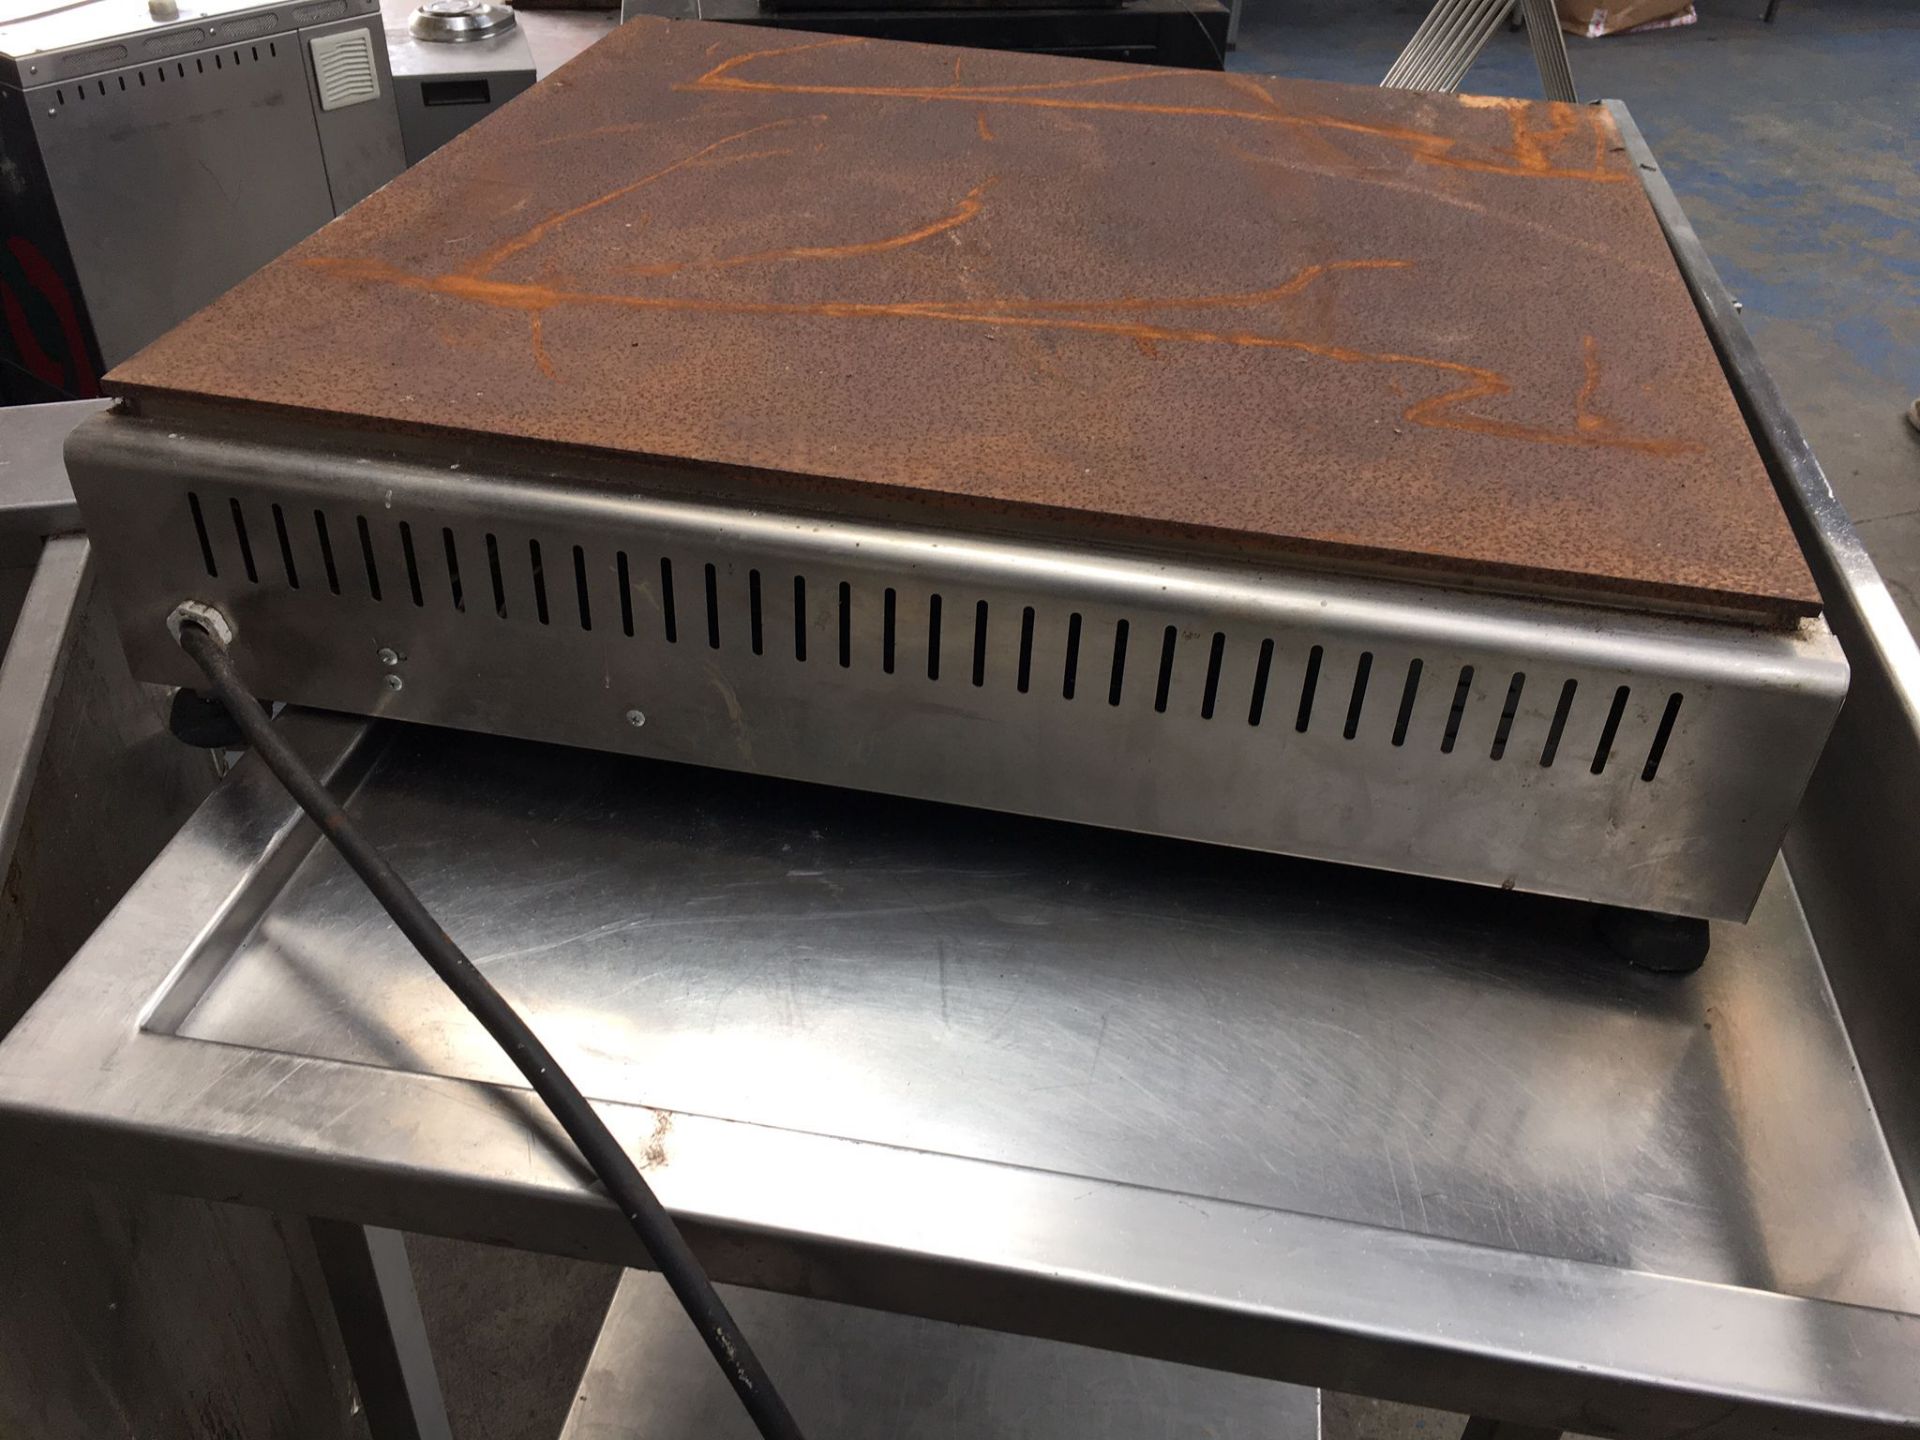 Table top hard top cooker 70cmD 74cmW - Image 2 of 3